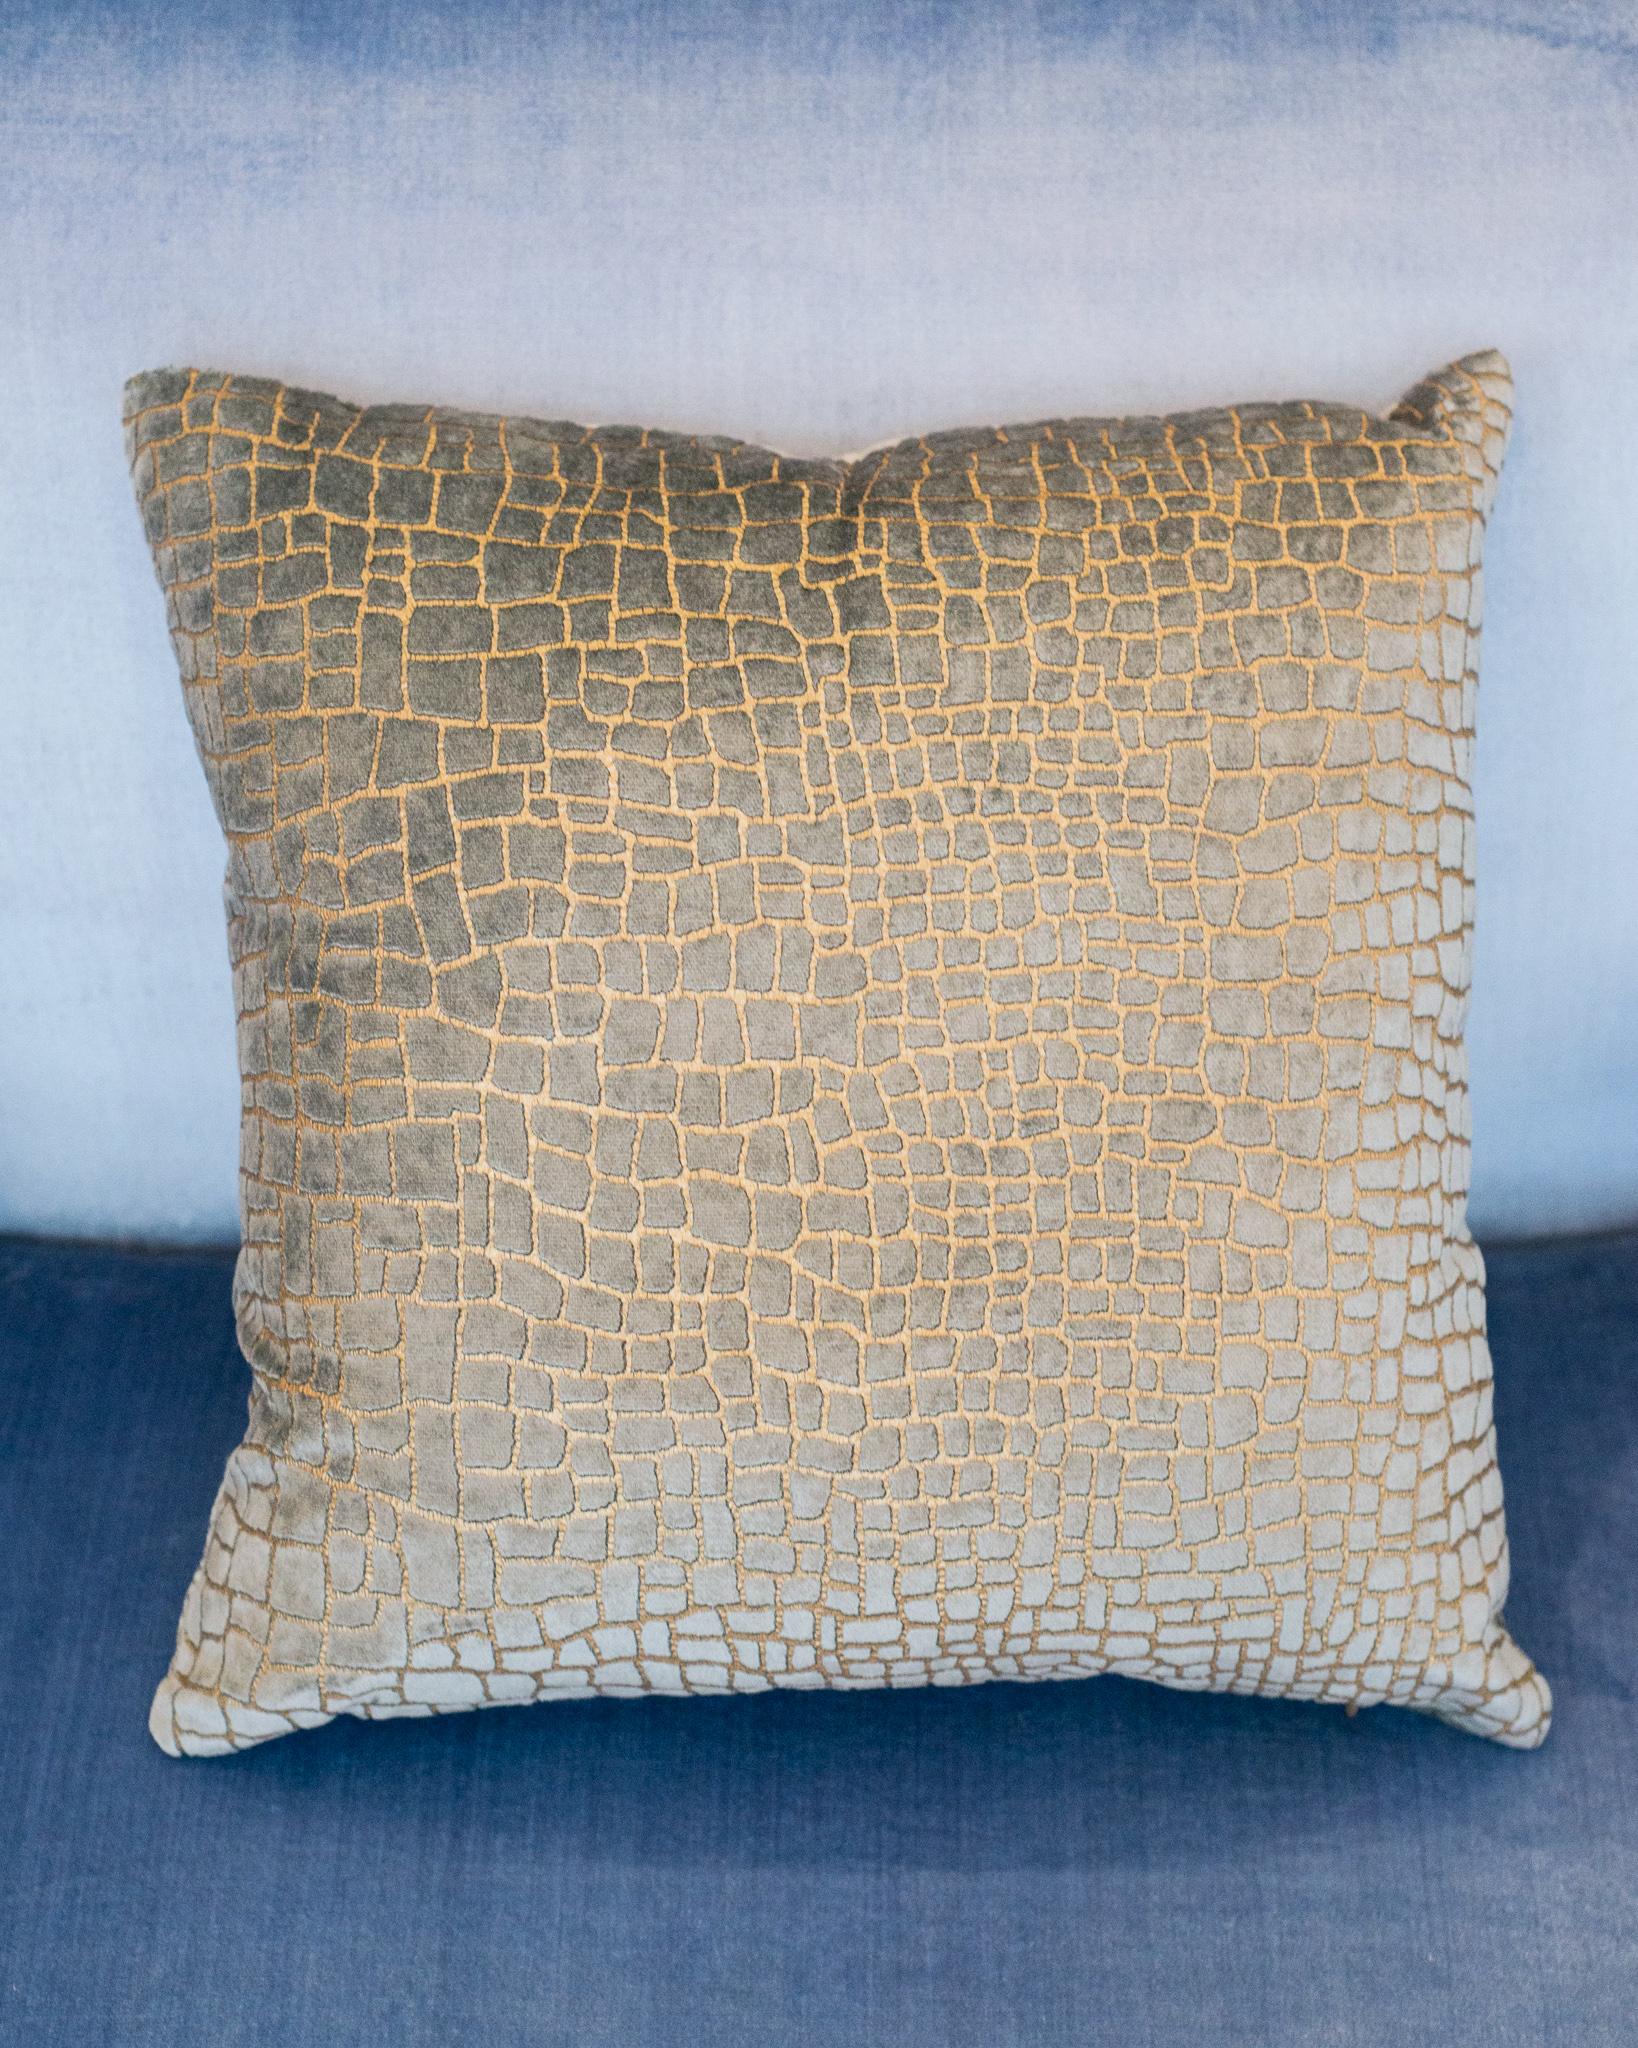 A Fortuny / Ventia Stvdivm pillow in pale blue crocodile print viscose cotton velvet with gold. Down filled, made in Venice.